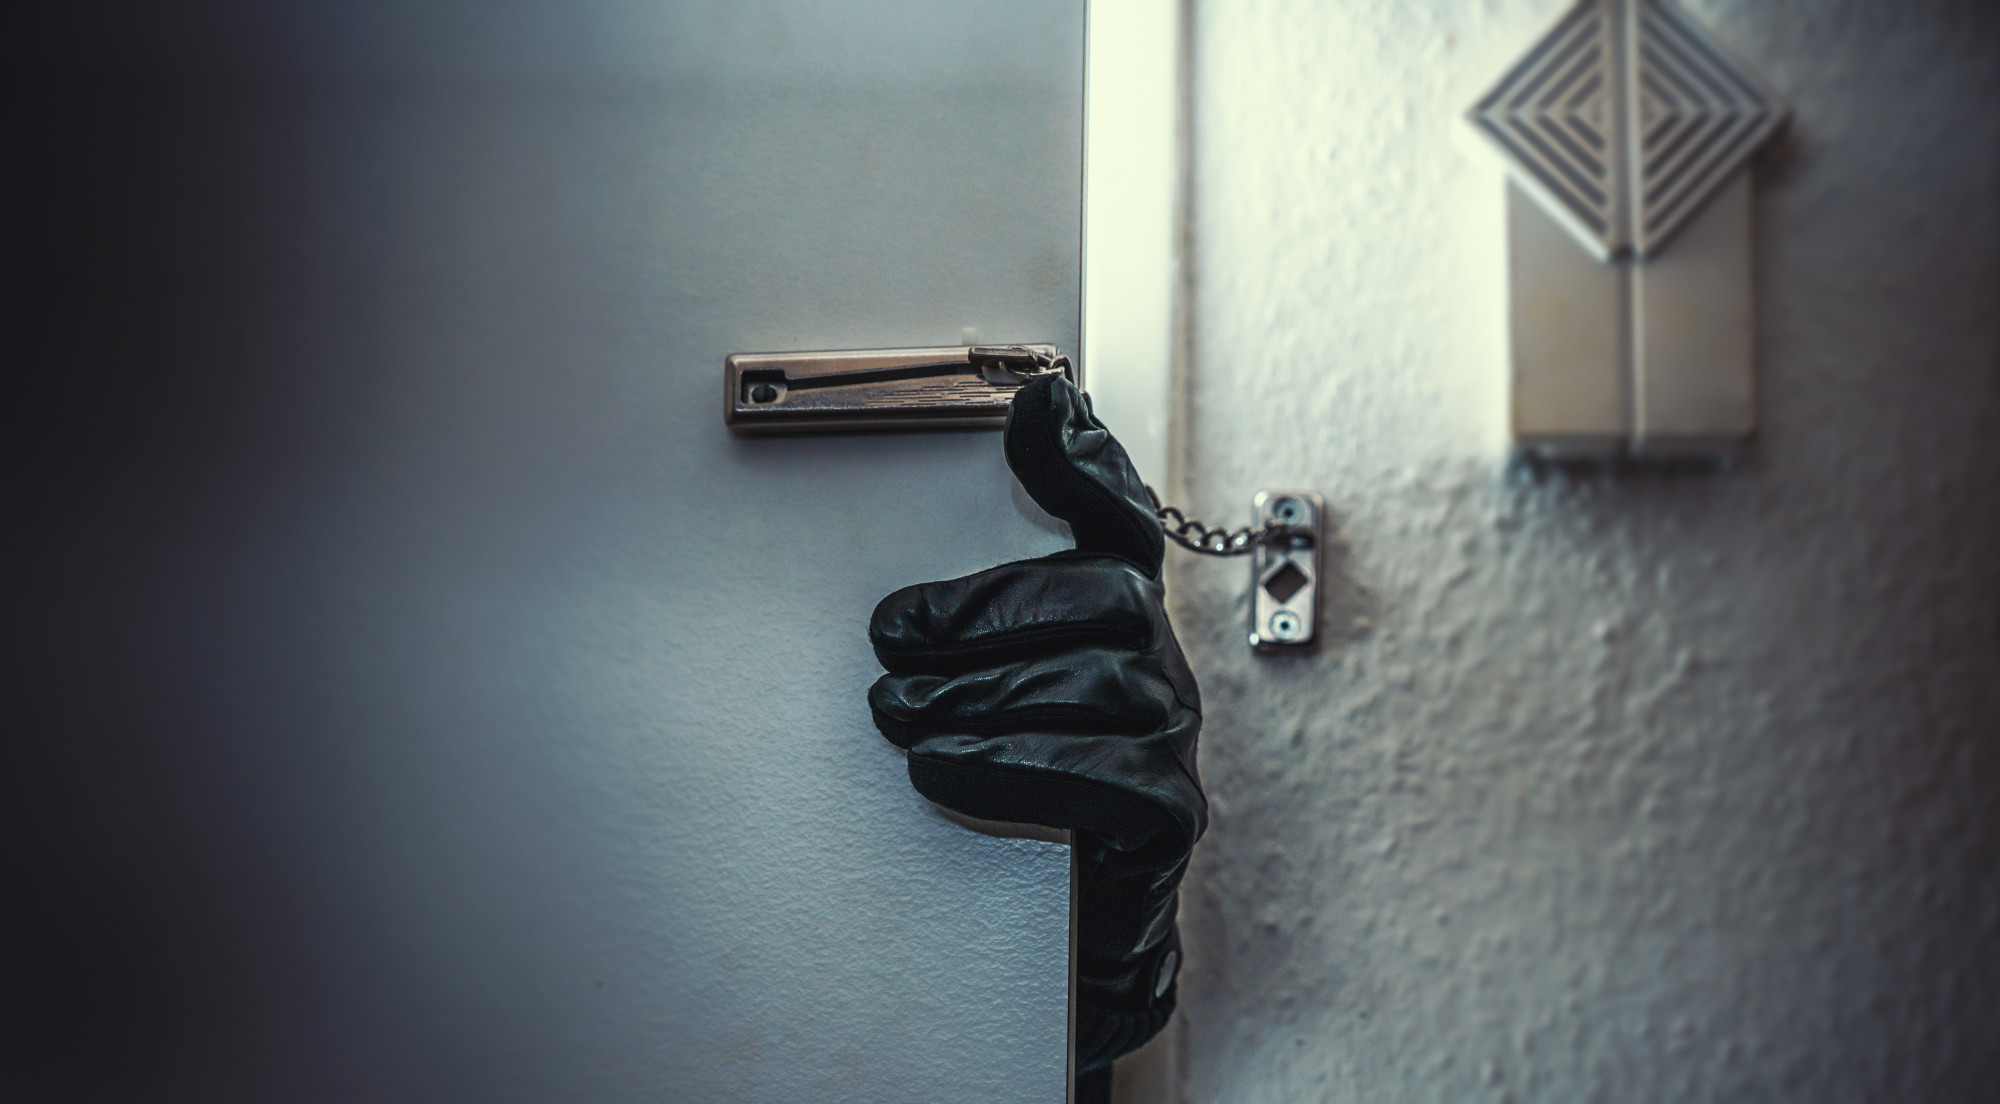 Home Security: How to Prevent Break-Ins